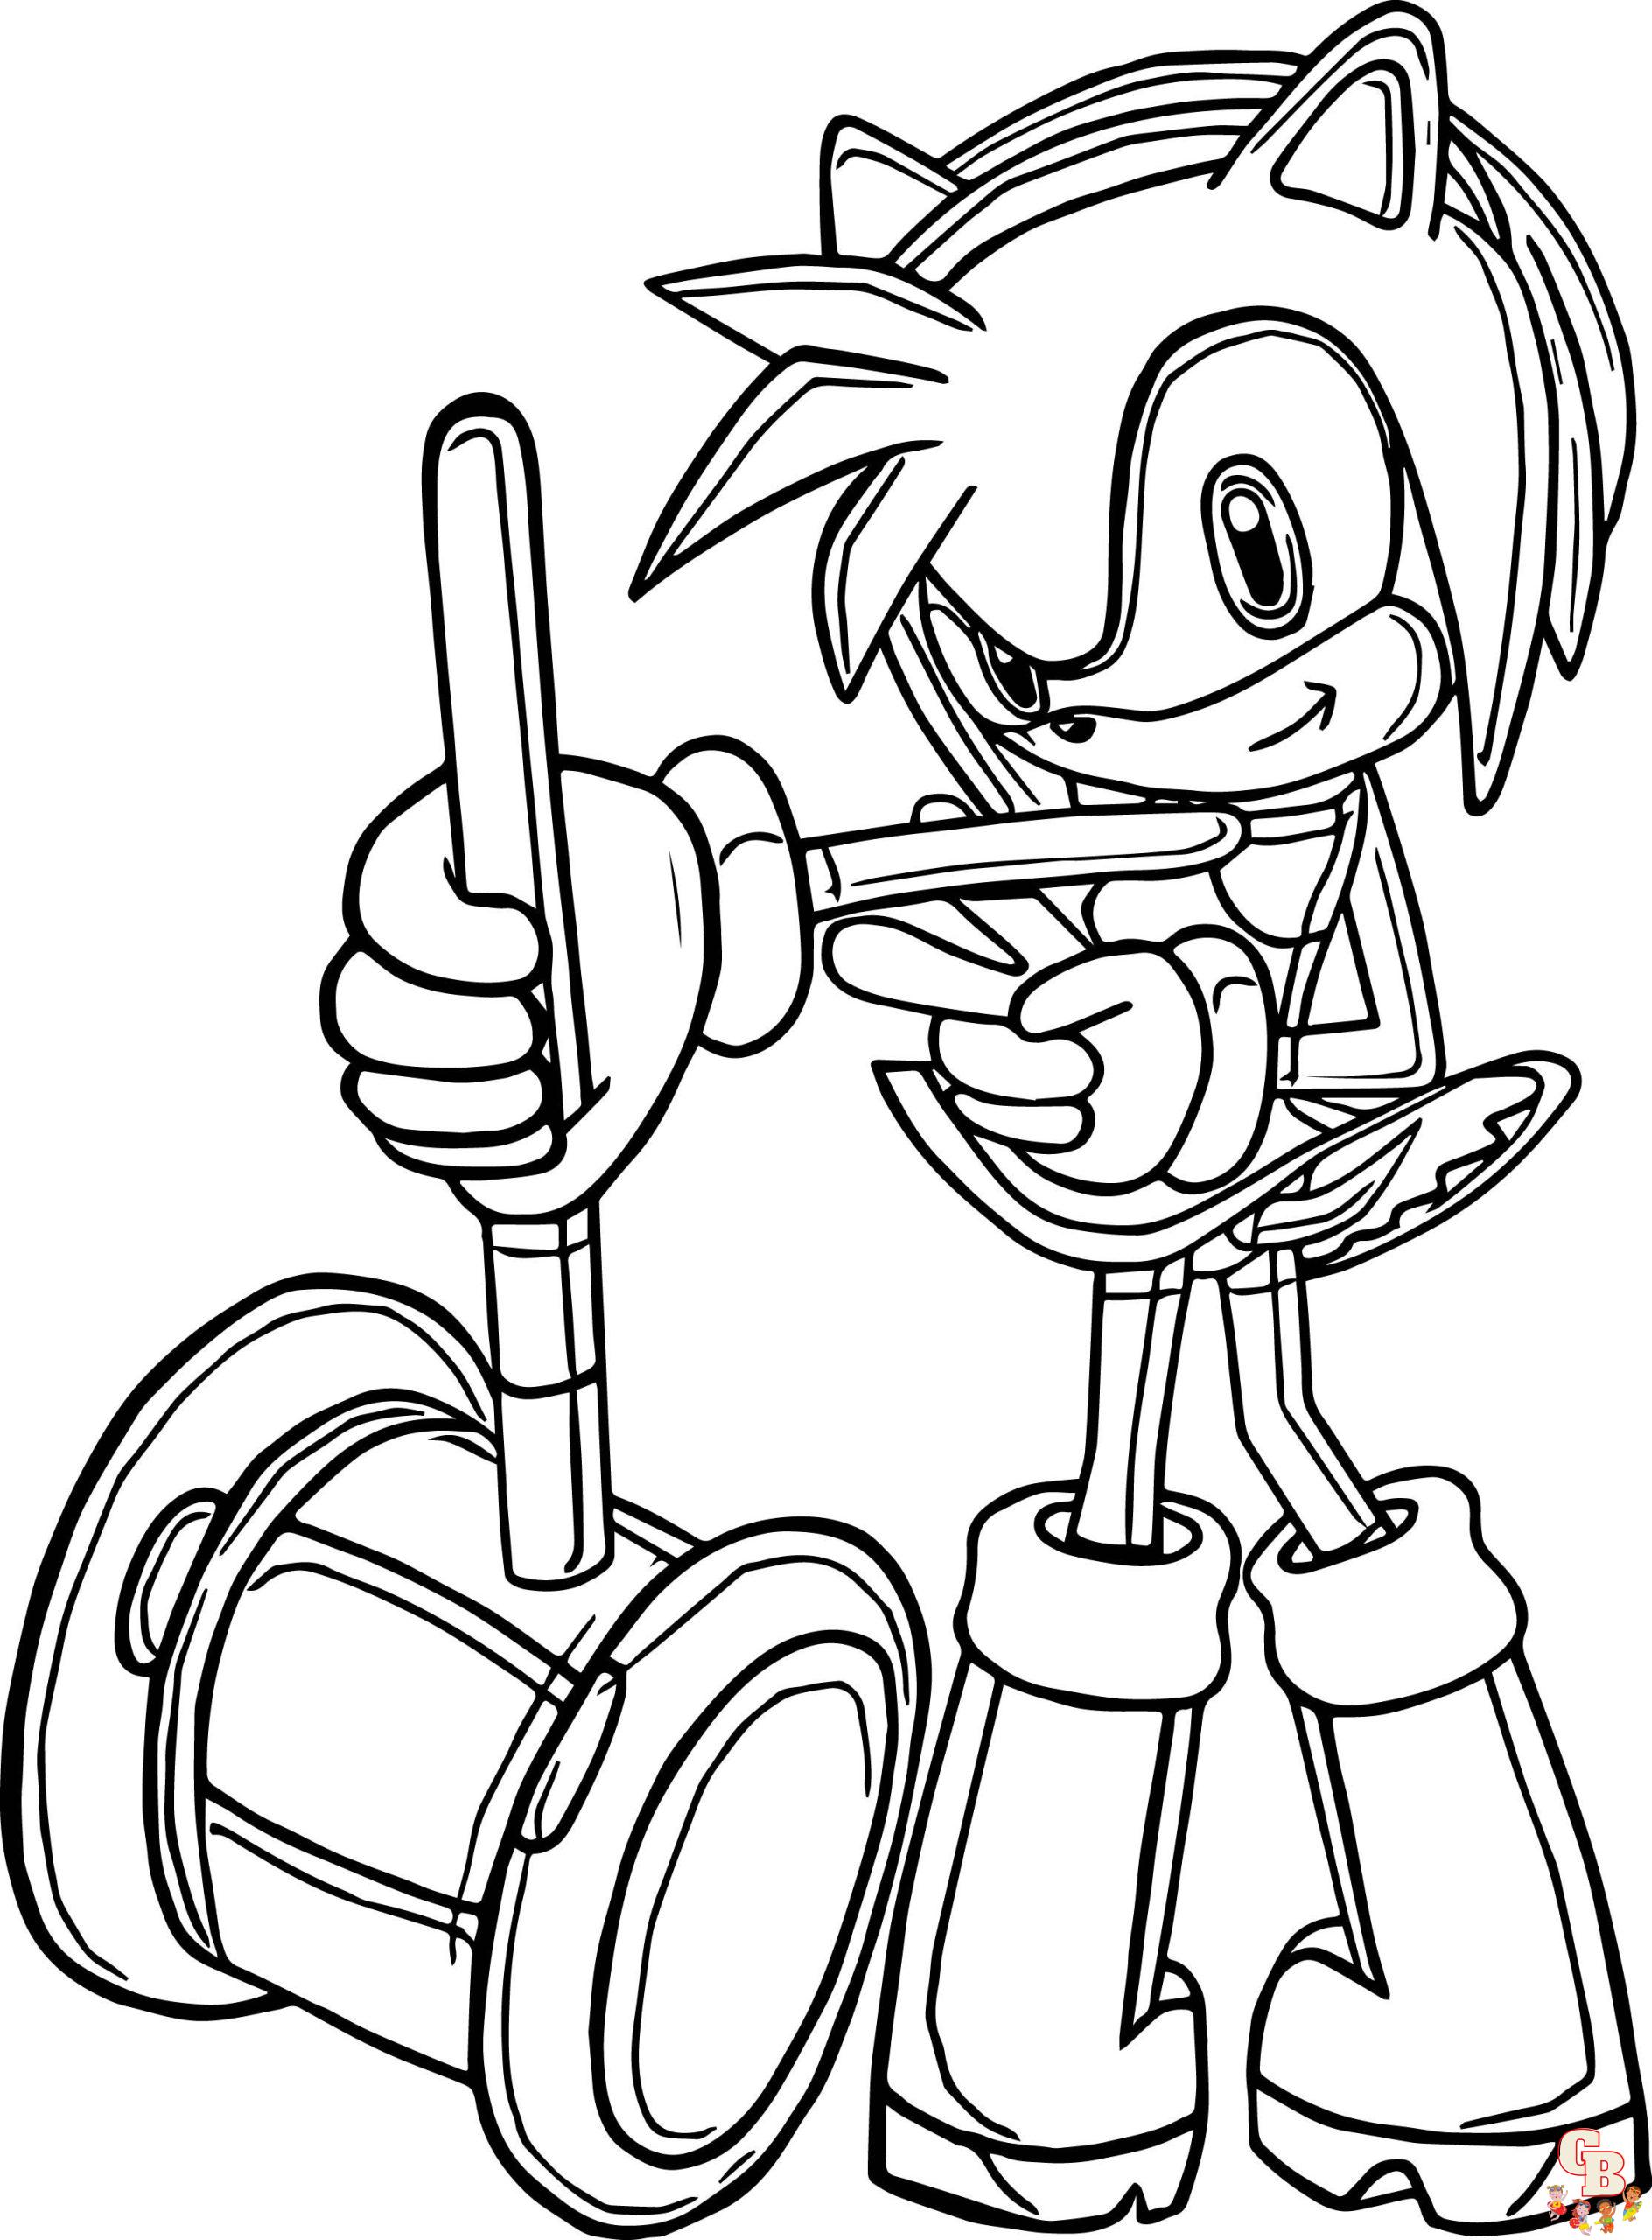 Amy Rose coloring page  Free Printable Coloring Pages